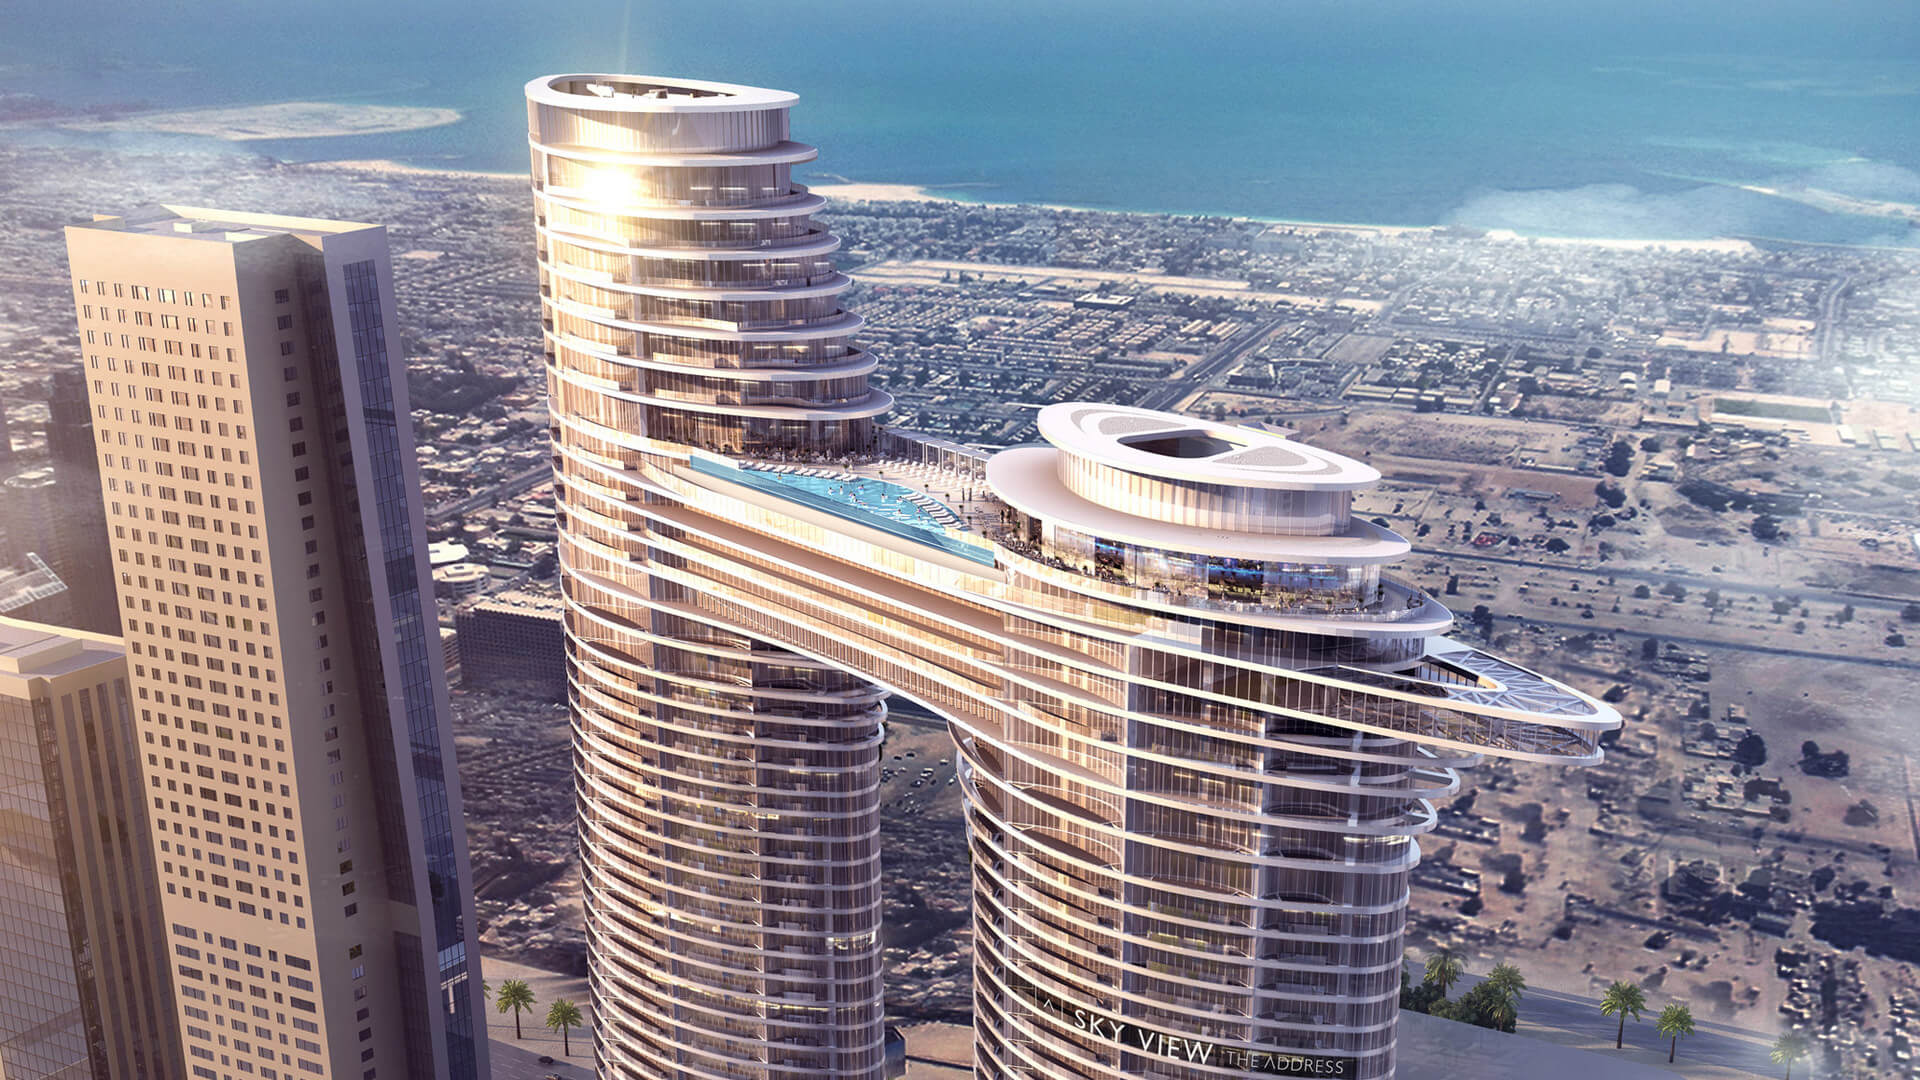 THE ADDRESS SKY VIEW TOWERS HOTEL APARTMENTS - Limitless Valley - Real Estate - Dubai